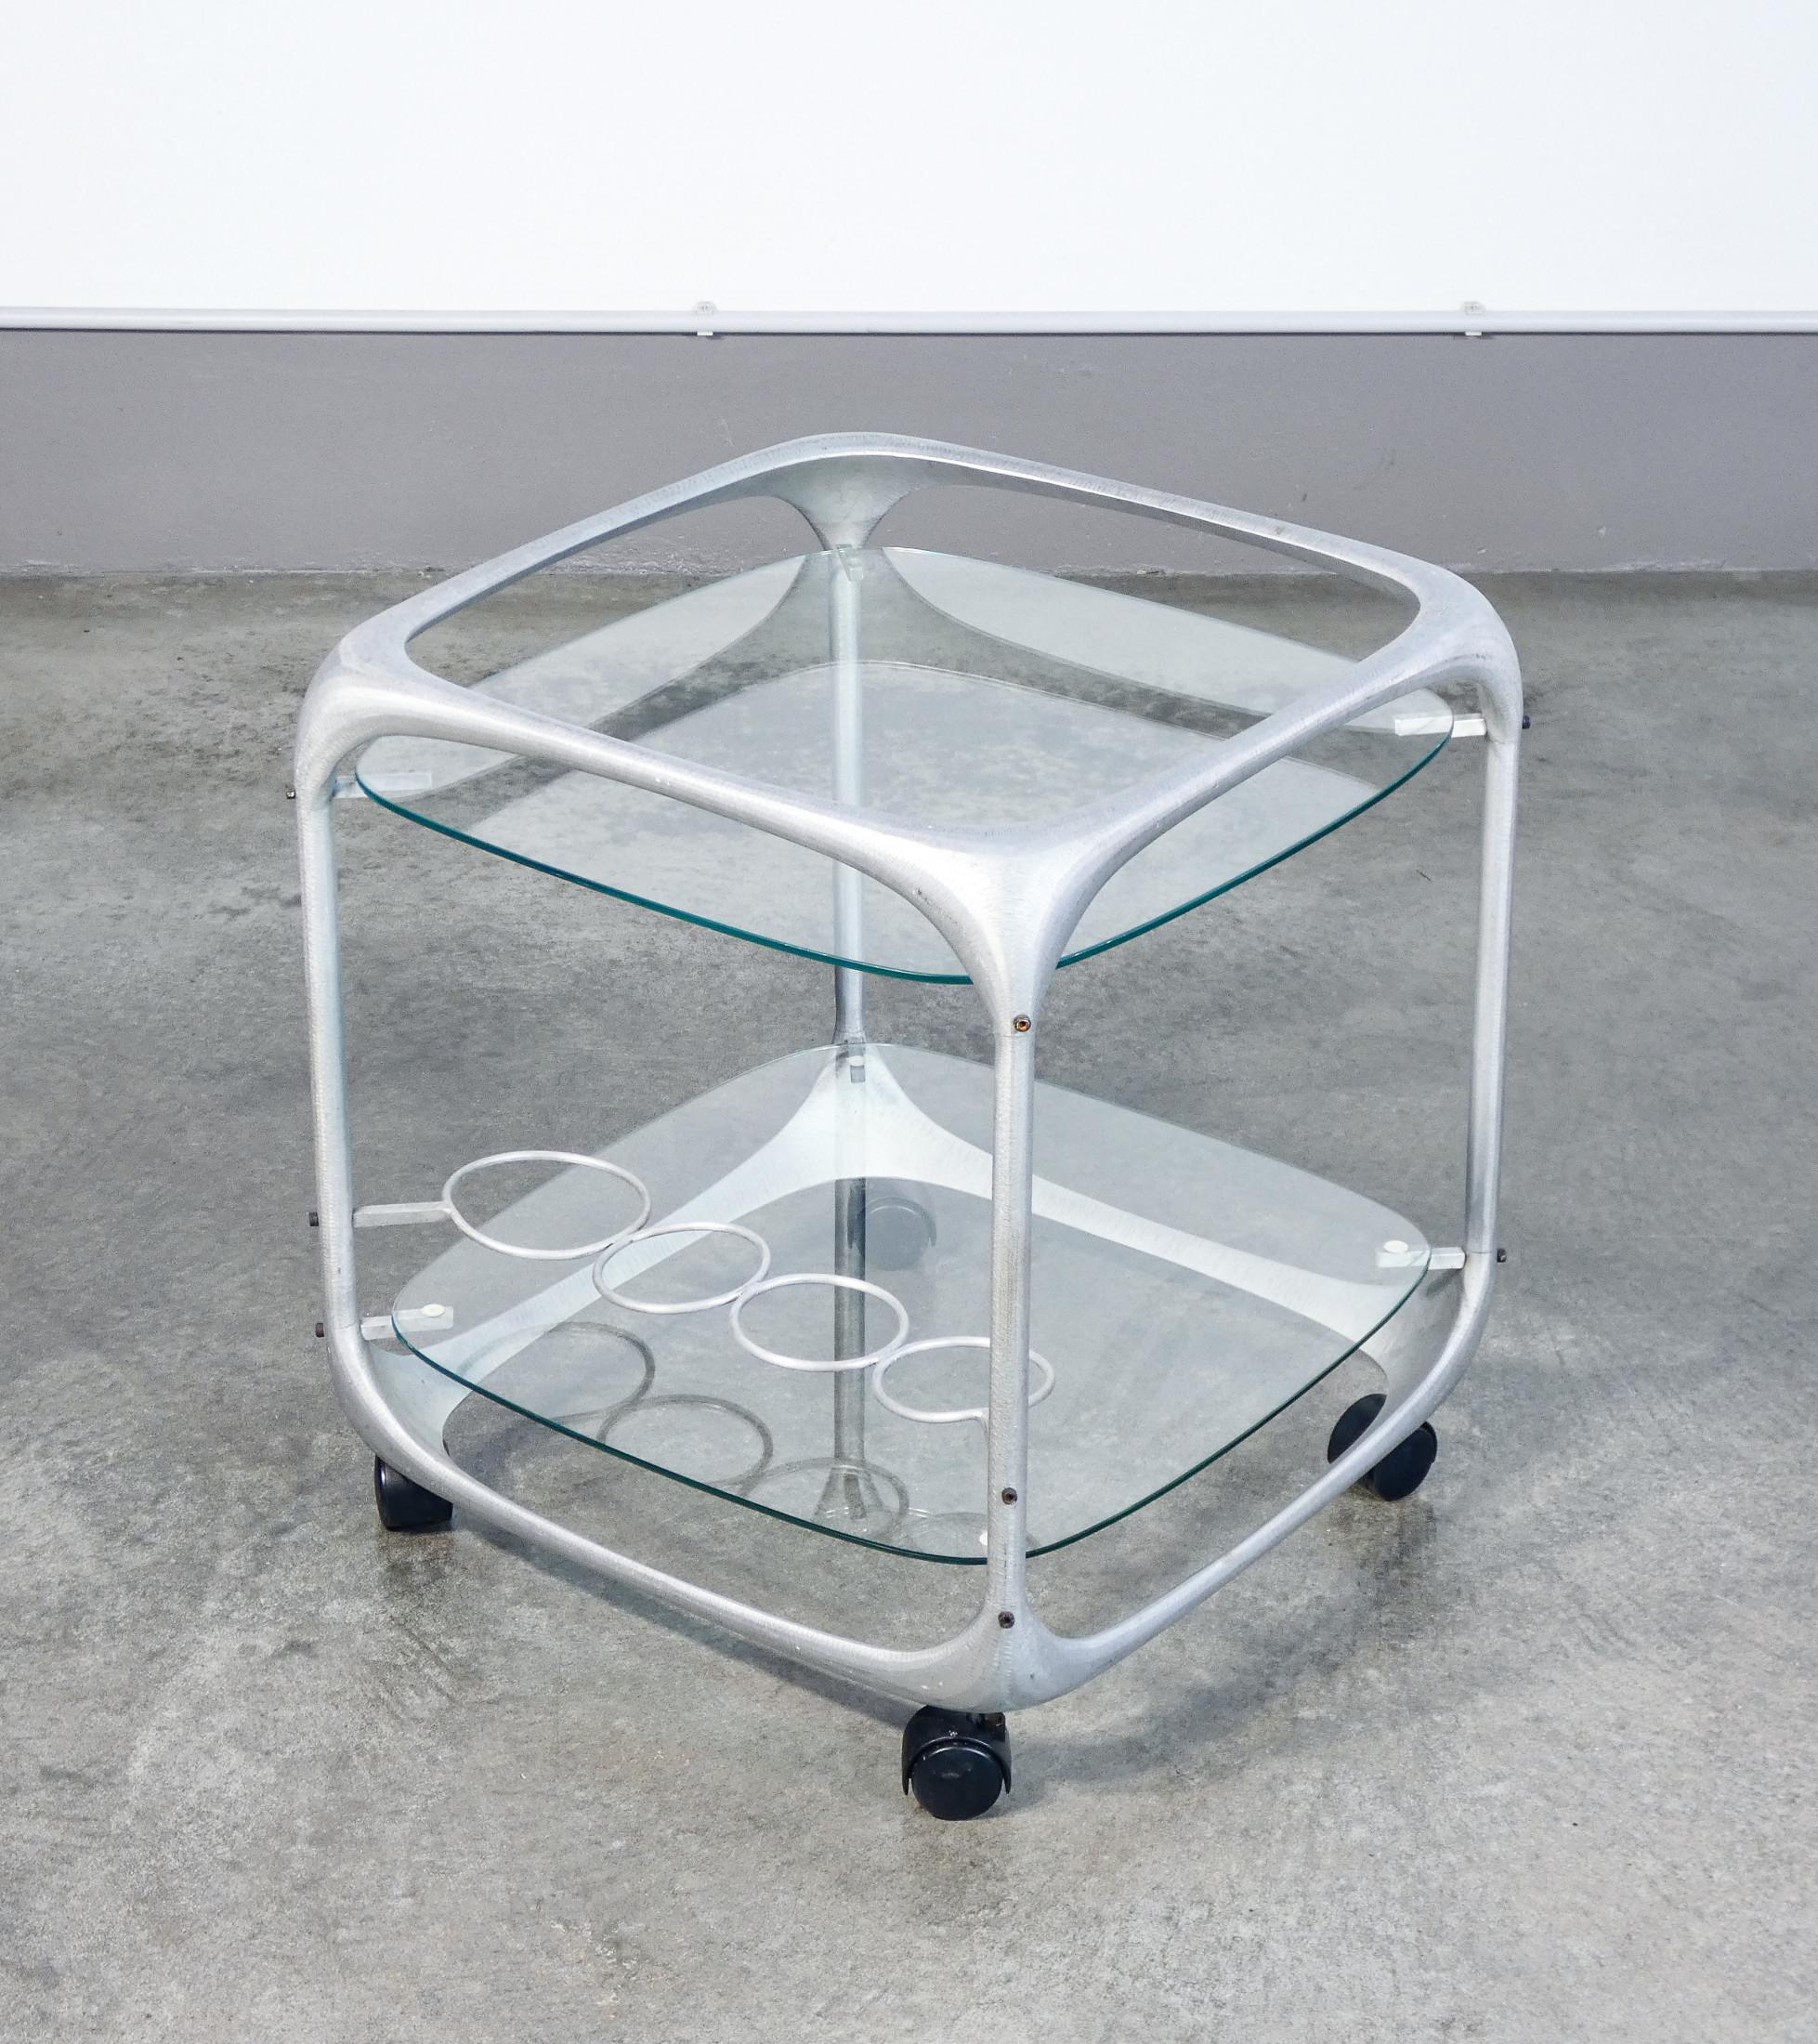 Bar cart
aluminum and glass, design
Renzo BURCHIELLARO.

ORIGIN
Italy

PERIOD
1970s

DESIGNER
Renzo BURCHIELLARO, also known as Lorenzo Burchiellaro, was an Italian designer and sculptor who was born in 1933 and died in 2017. He is famous for his